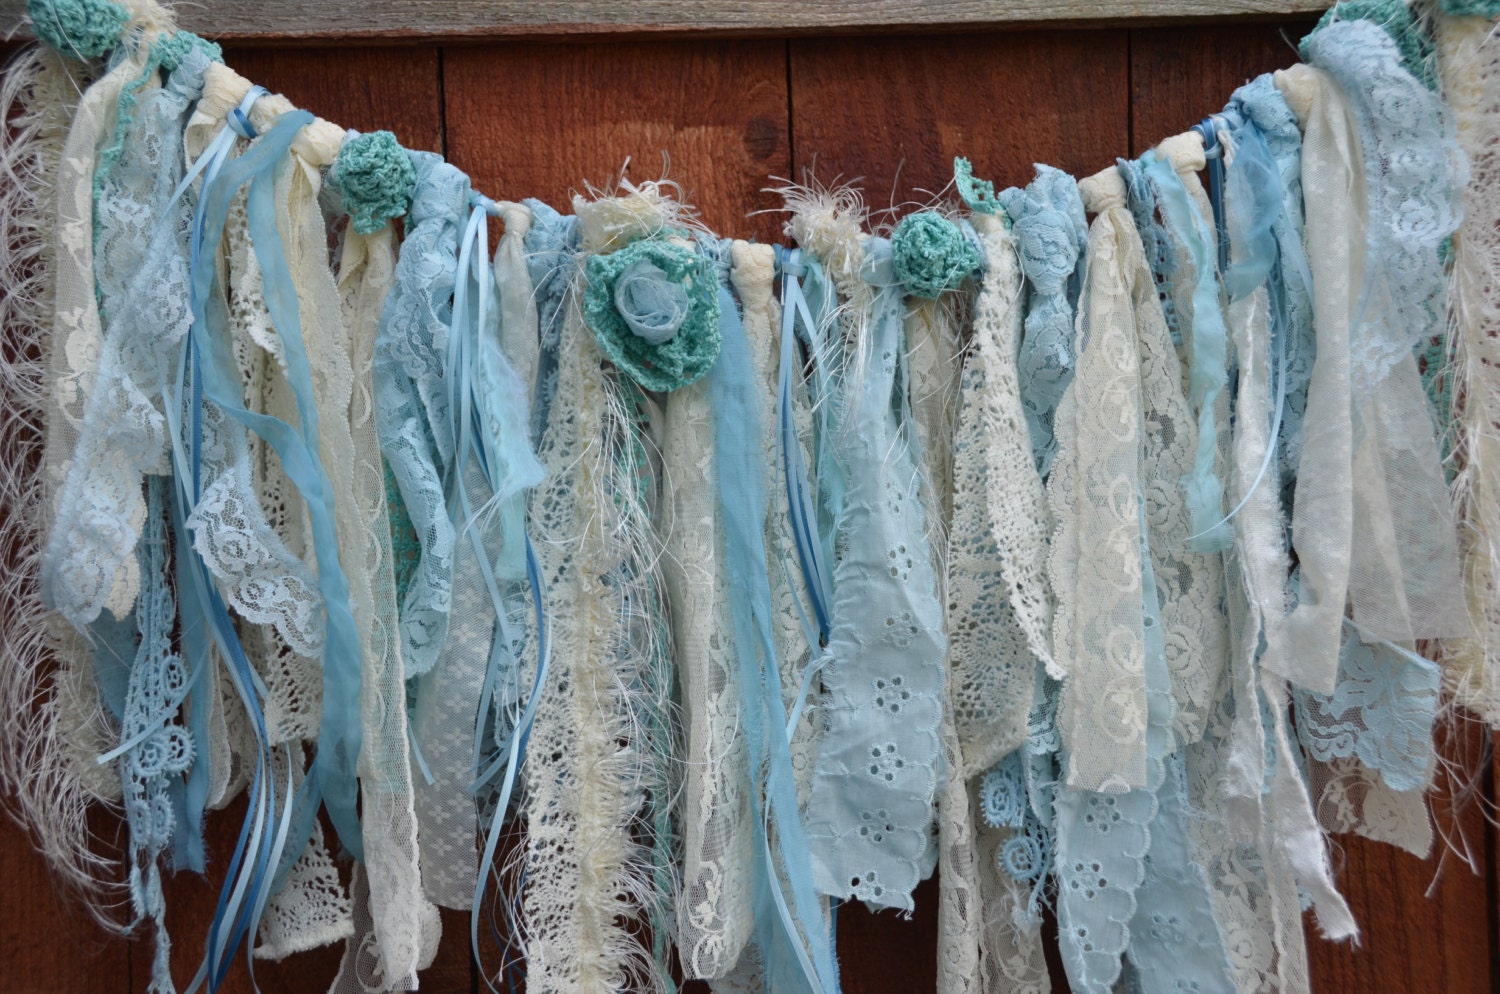 Lace Wedding Garlad White blue and pale aqua 26 inches long Lots of vintage lace 5 aqua lace flowers